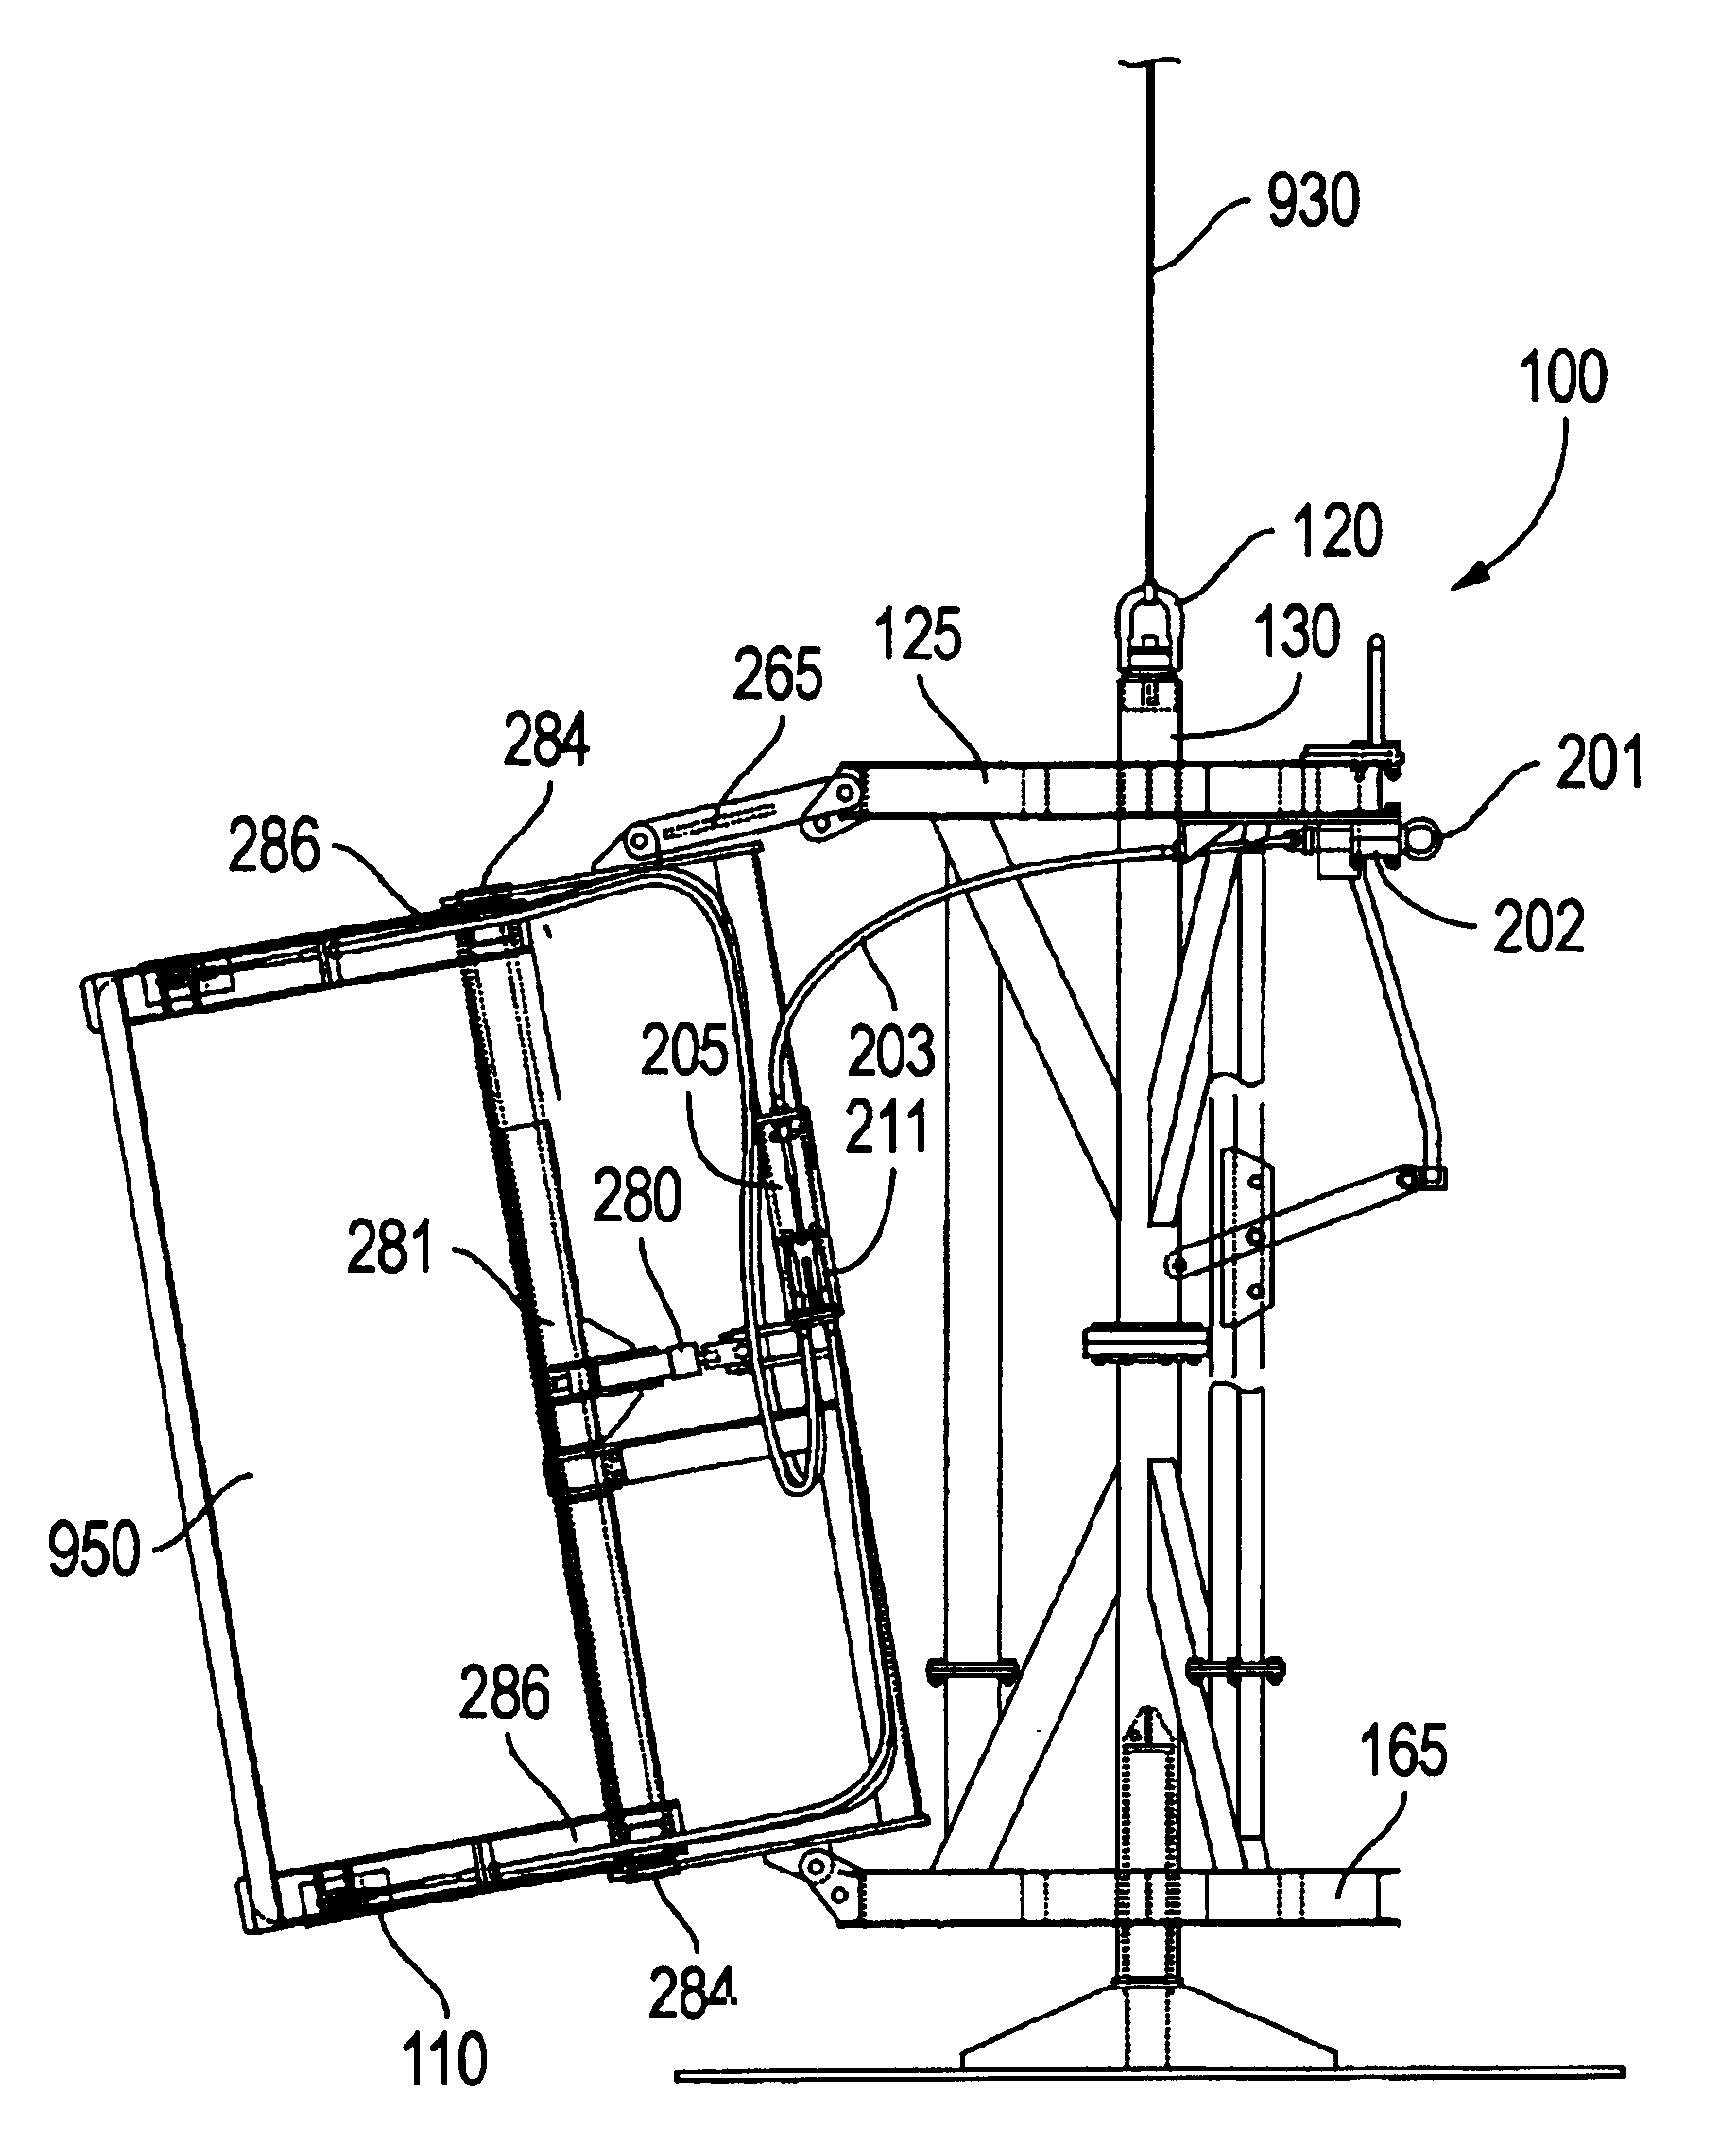 Apparatus for remote installation of devices for reducing drag and vortex induced vibration